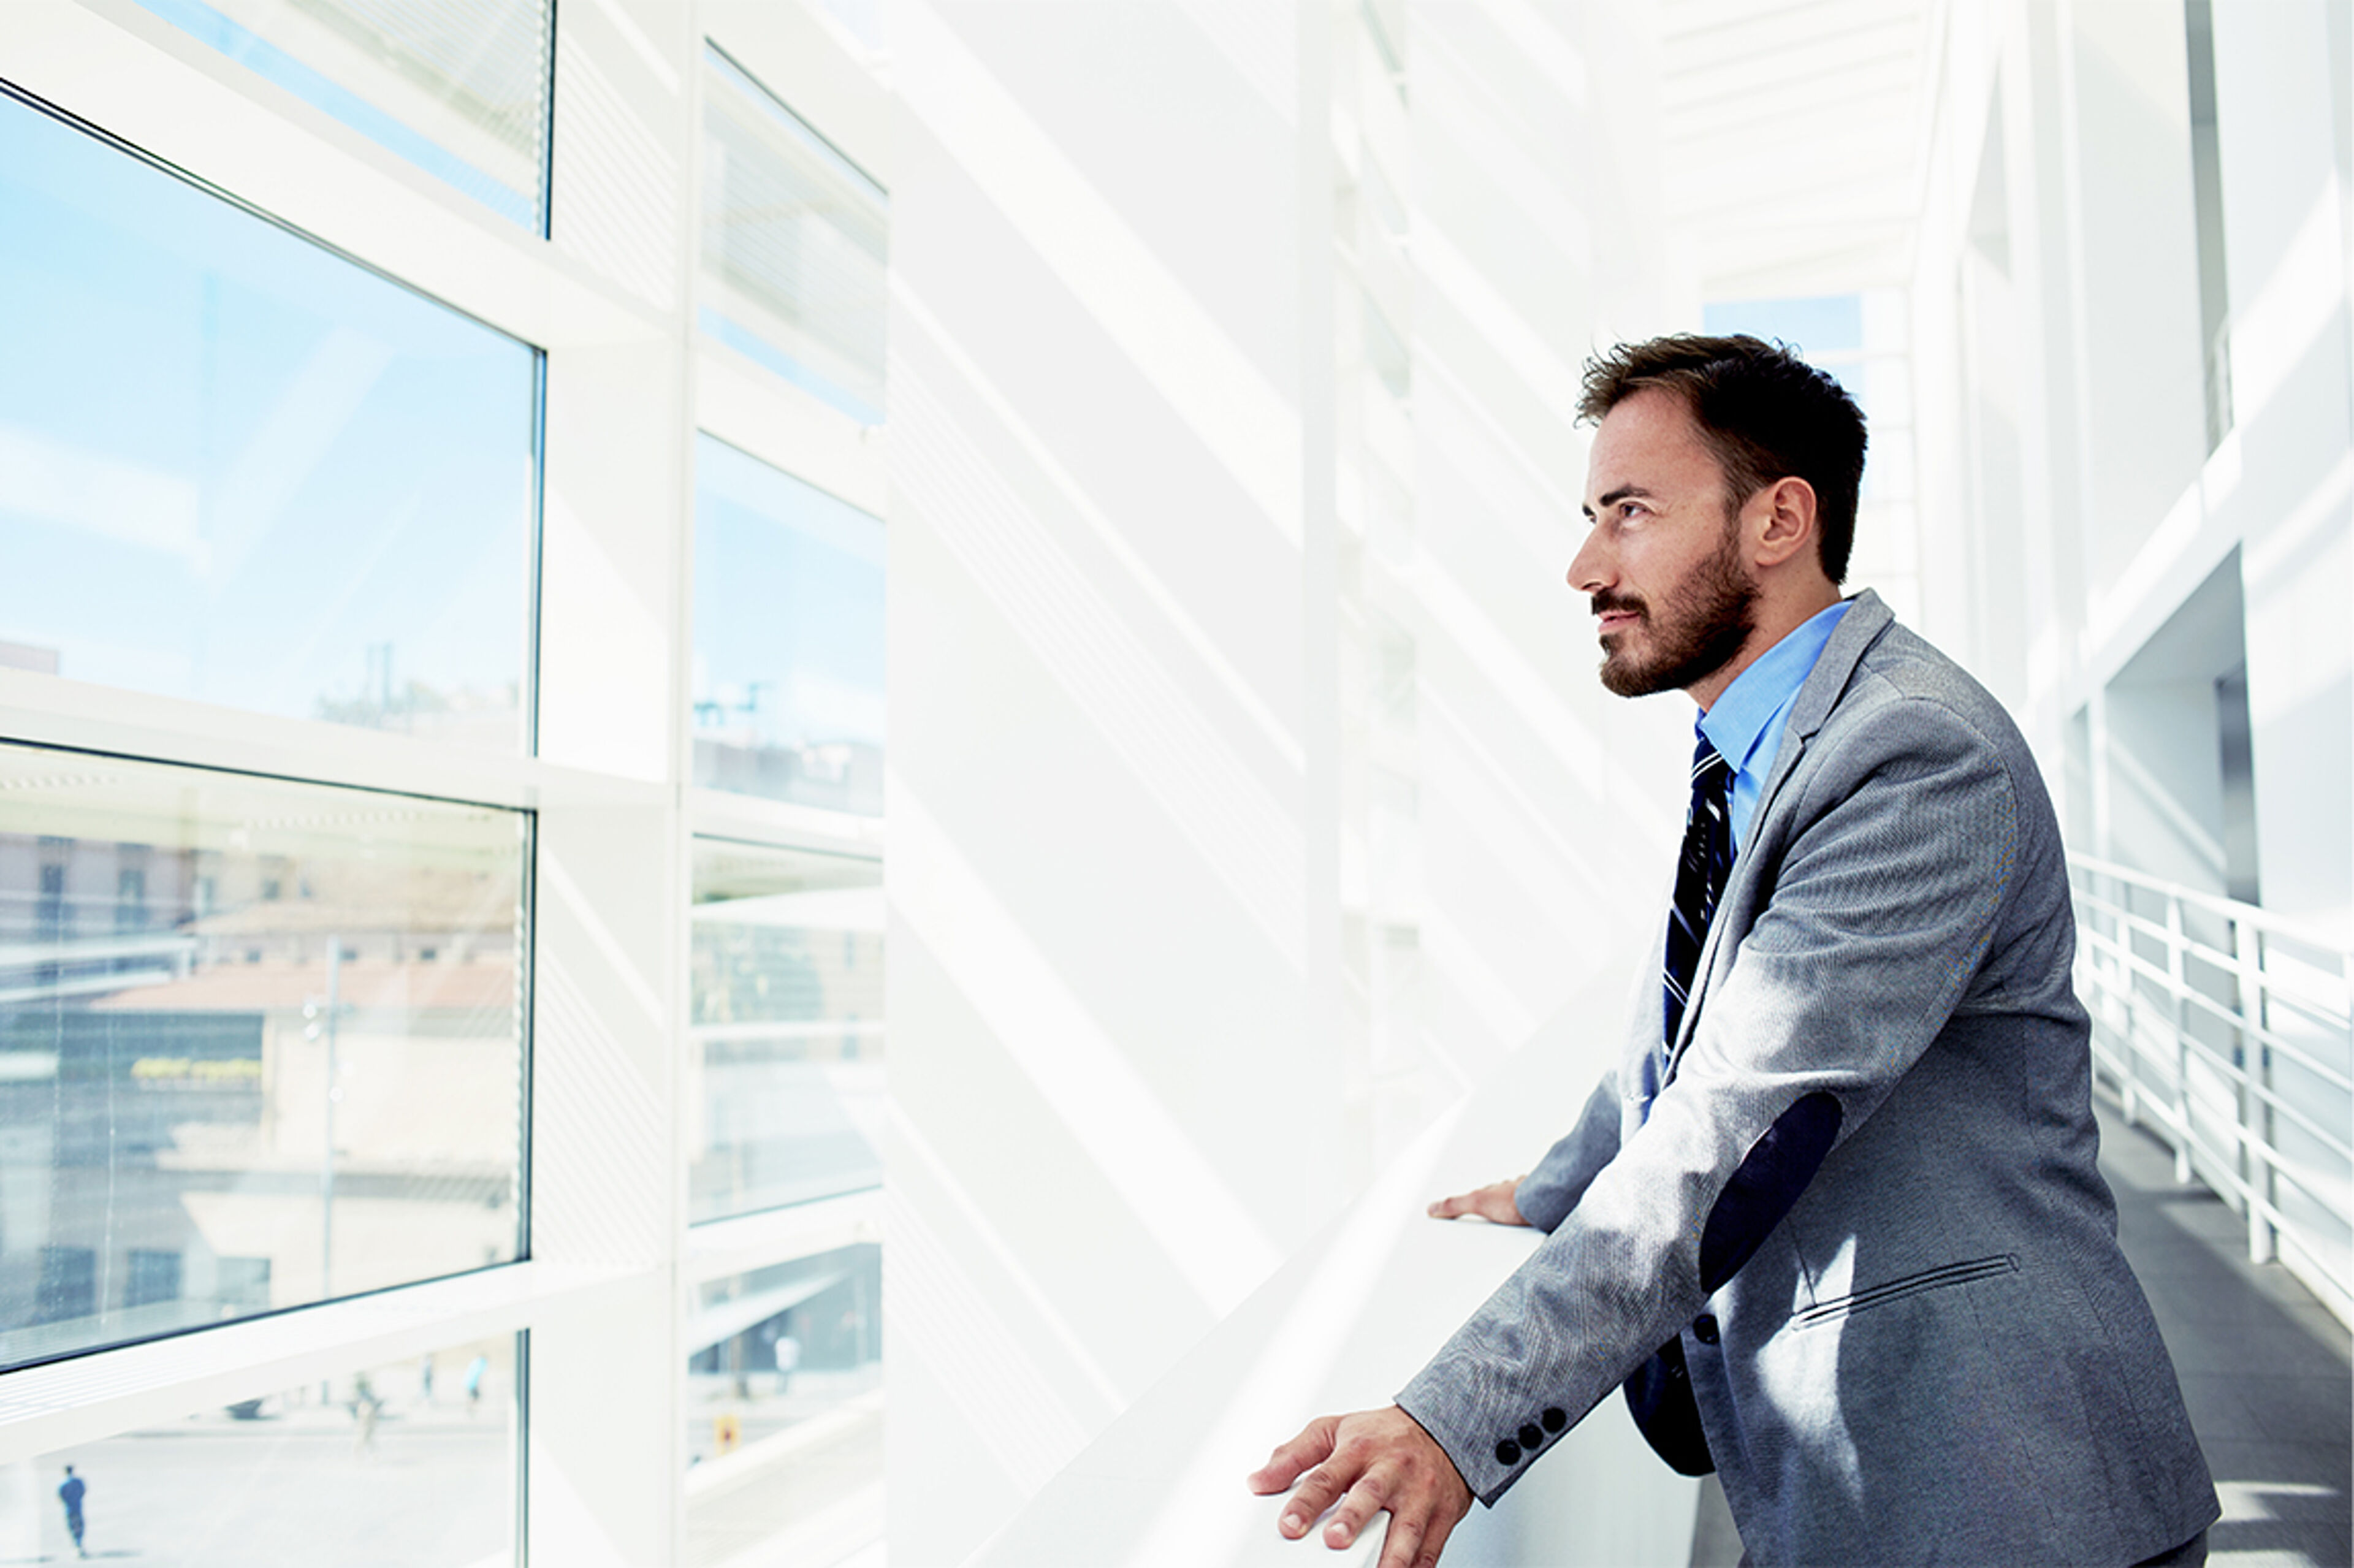 A pensive businessman in a suit looks out a bright office window, overlooking an urban landscape.